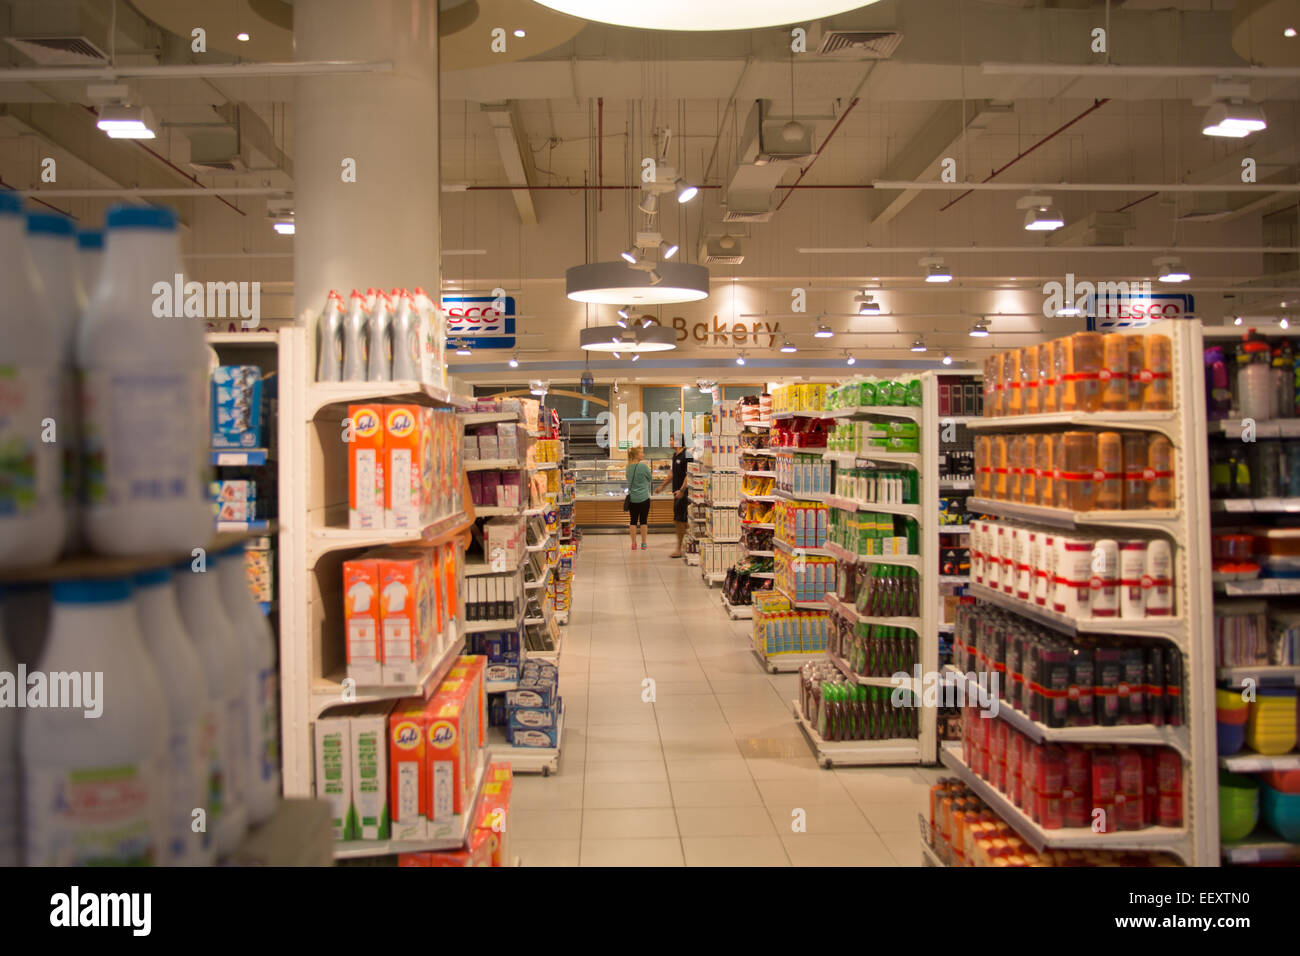 Choithram in partnership with Tesco, supermarket store in The Greens area of Dubai UAE Stock Photo